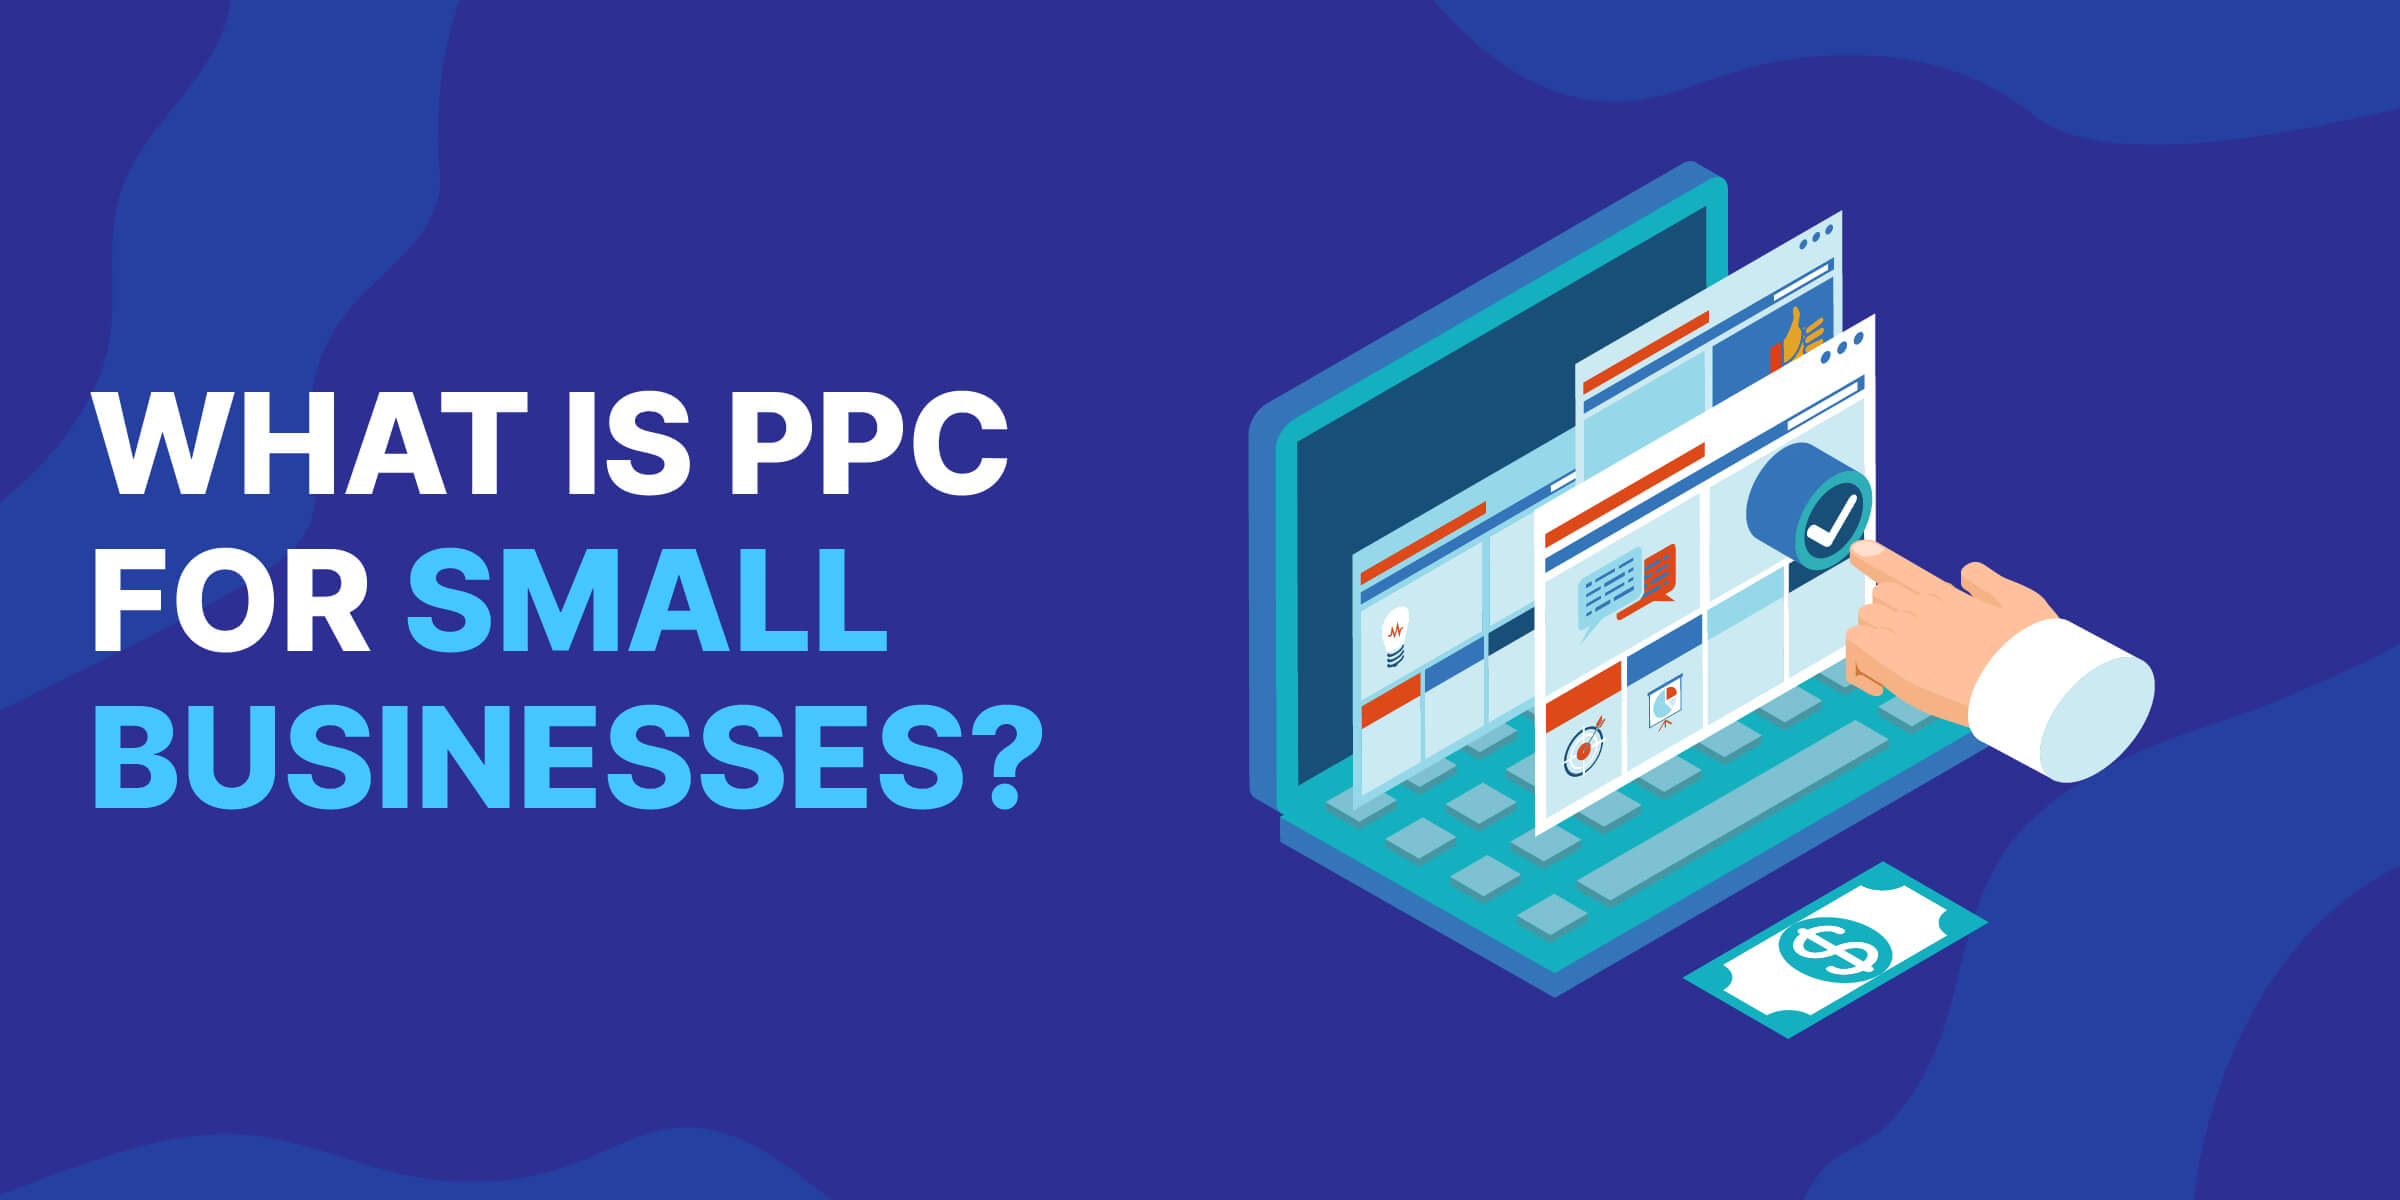 What Is PPC for Small Businesses